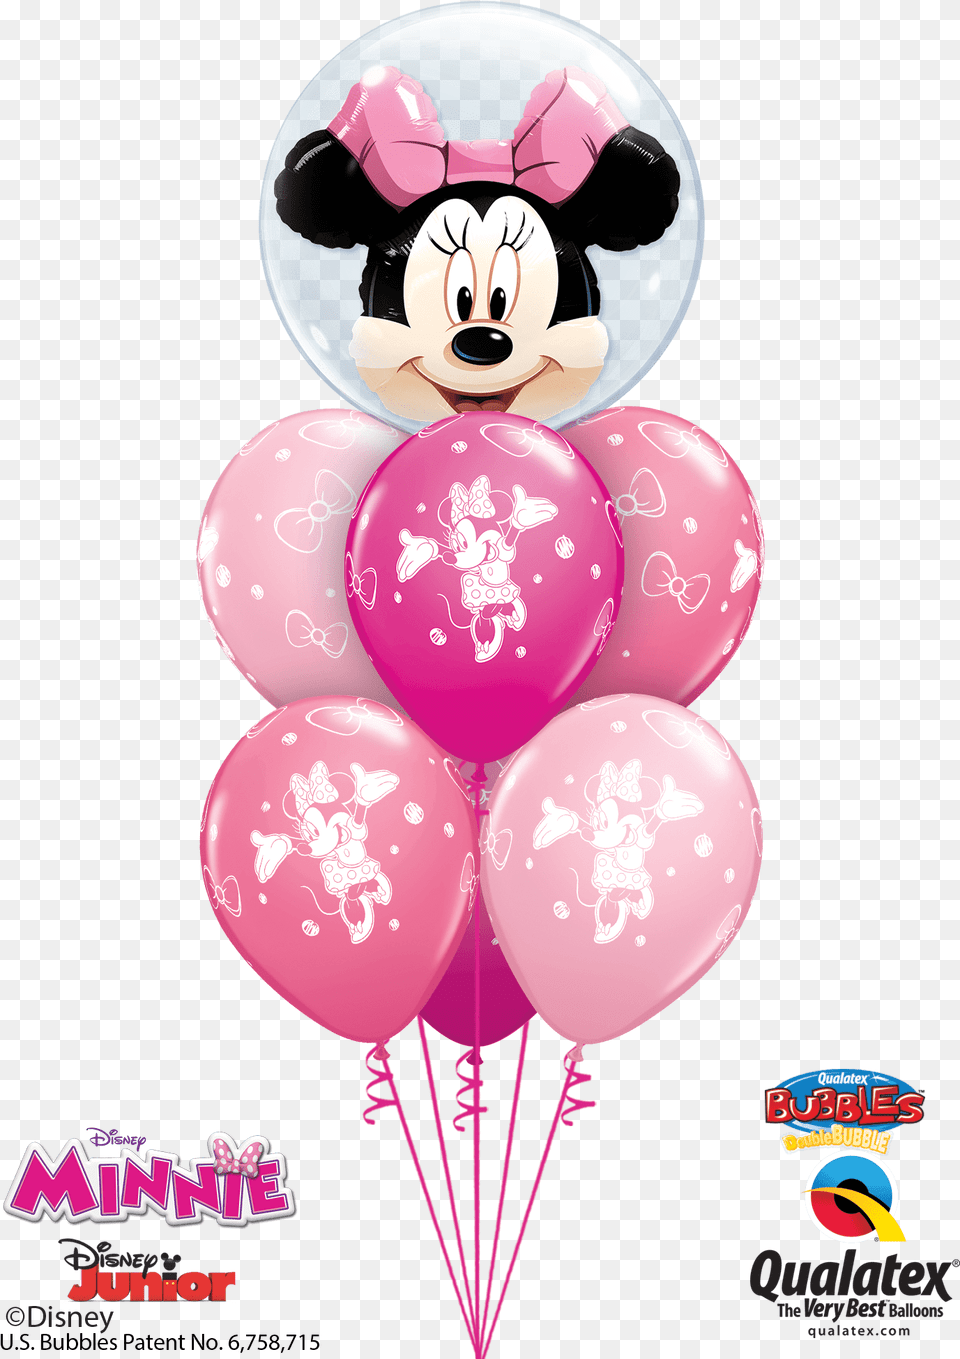 Pink Minnie Mouse Minnie Mouse Balloons Hd Birthday Cake Balloon Bouquet Png Image